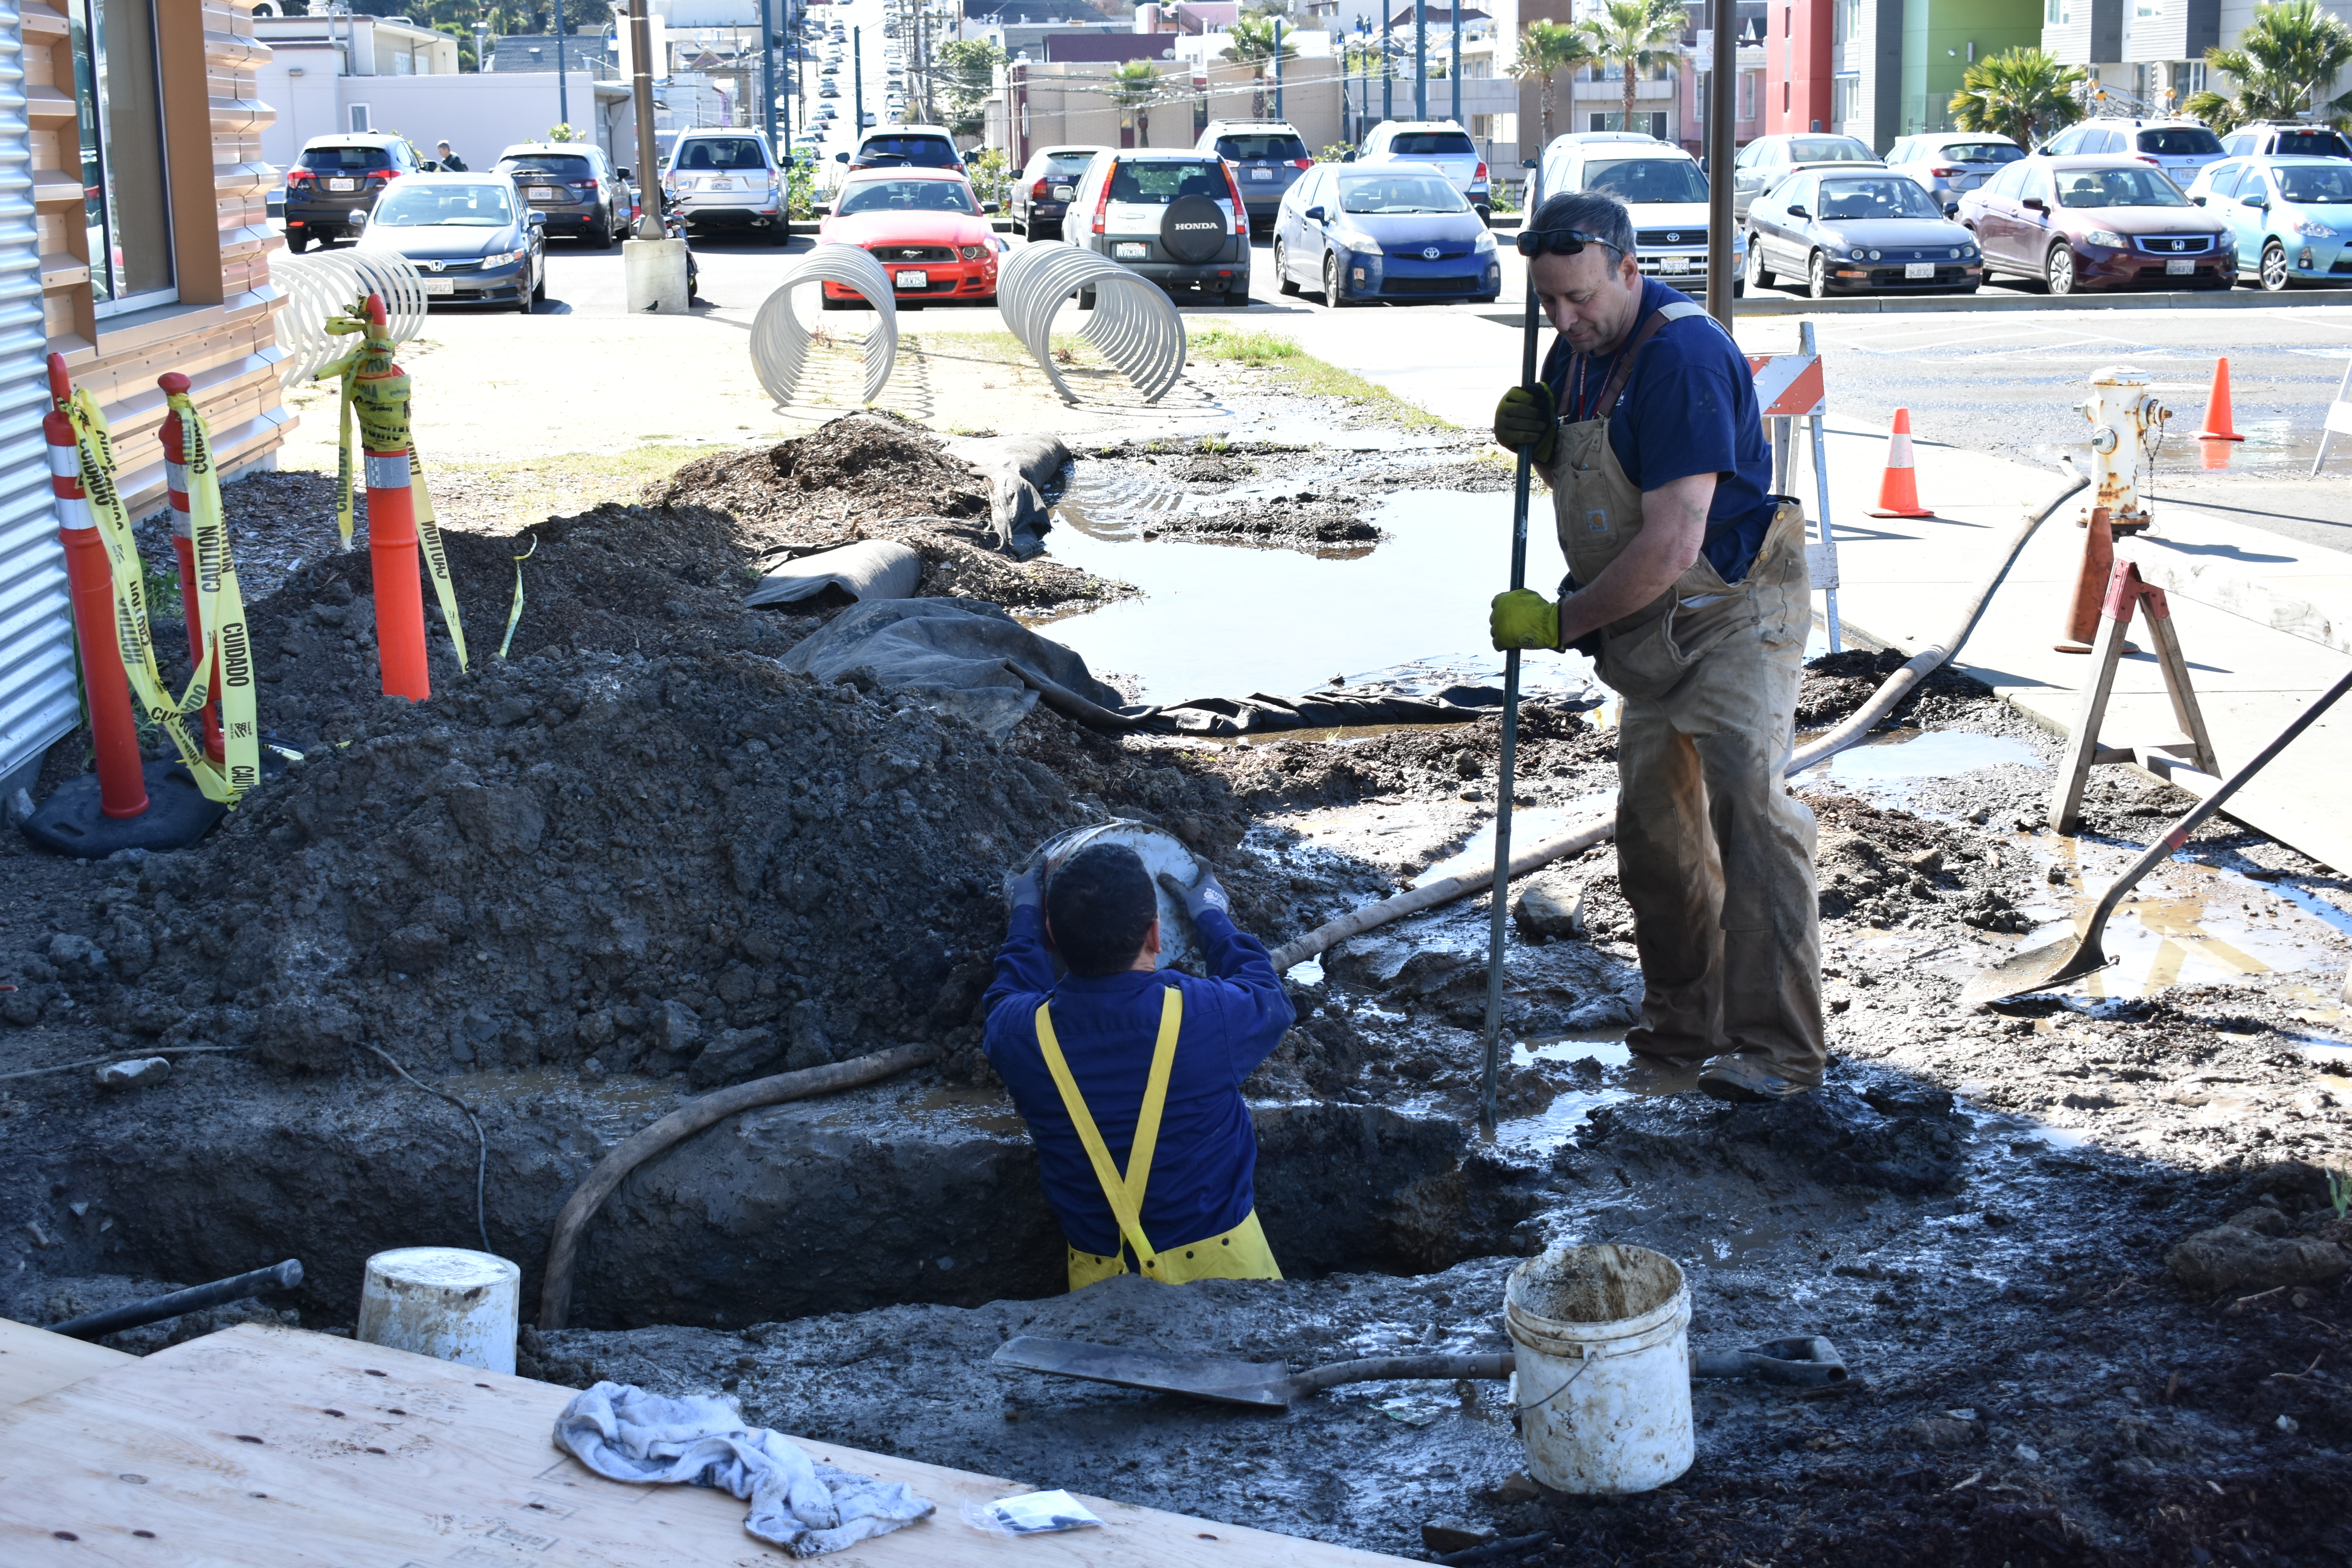 (L-R) ACC Engineering Systems Plumber Jose Lopez and a man who goes by Dave The Plumber dig a hole to uncover the source of a water leak at the Ocean Campus Multi-Use Building (MUB) on Feb. 15, 2018. Photo by Michael Menaster/The Guardsman.